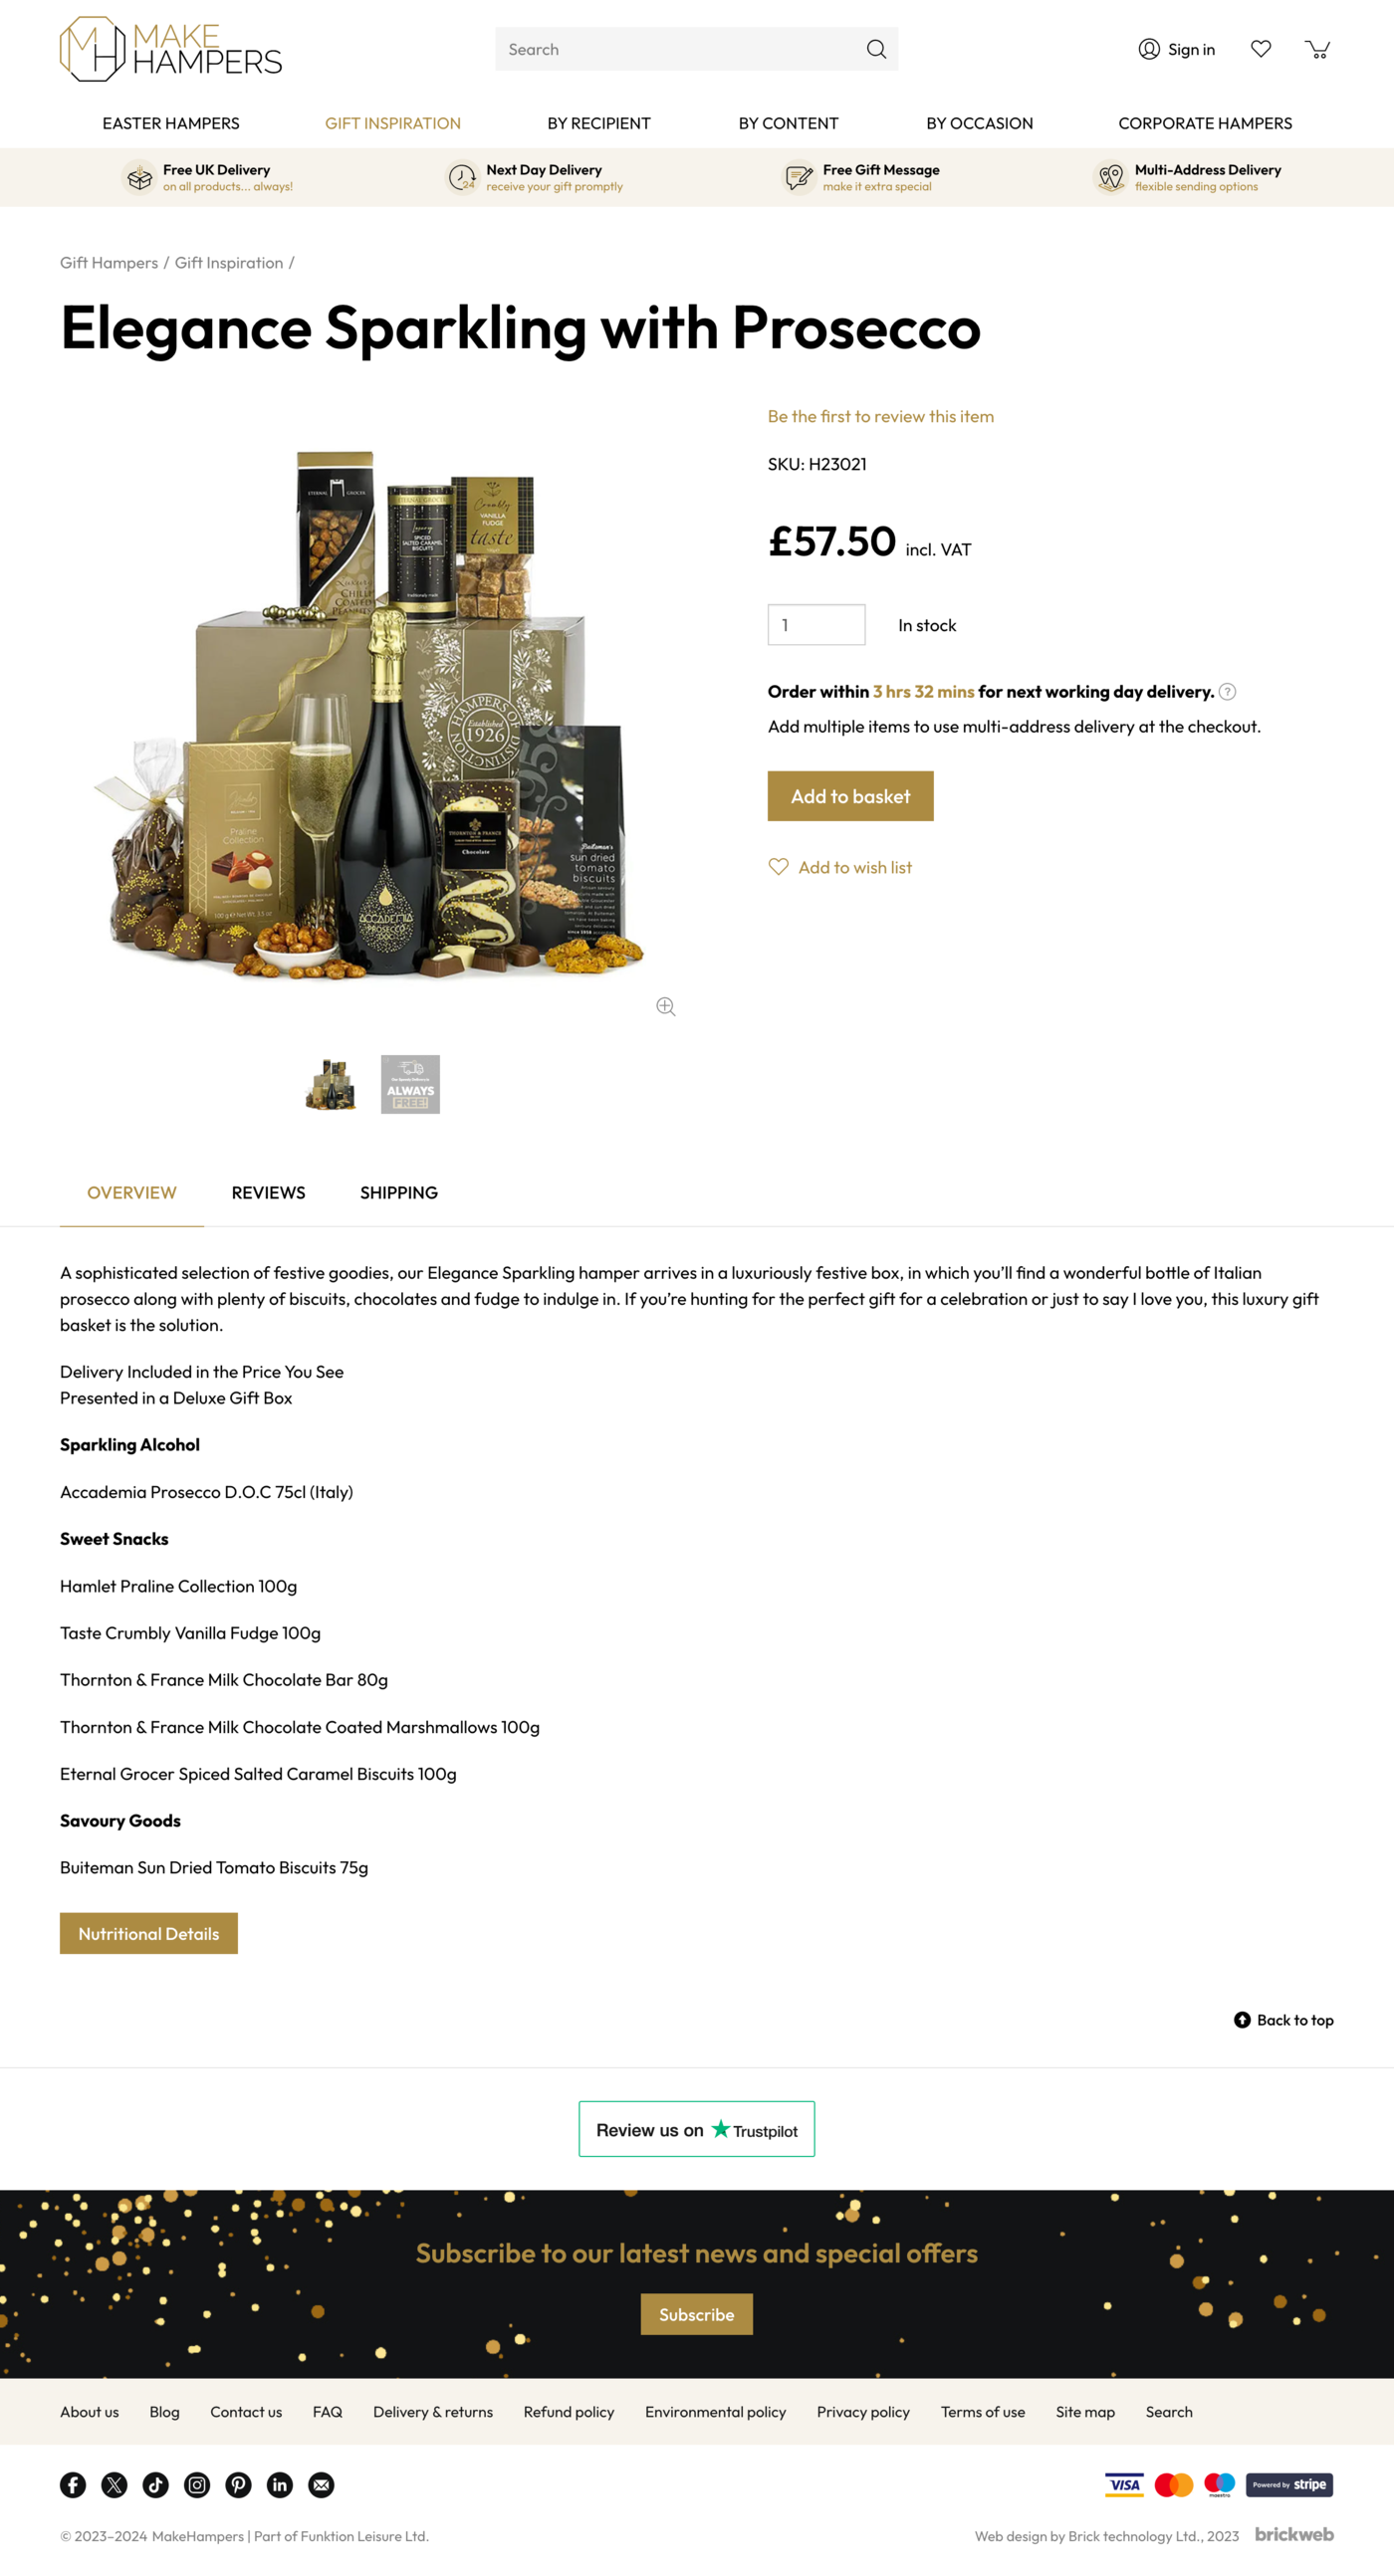 Make Hampers Product page